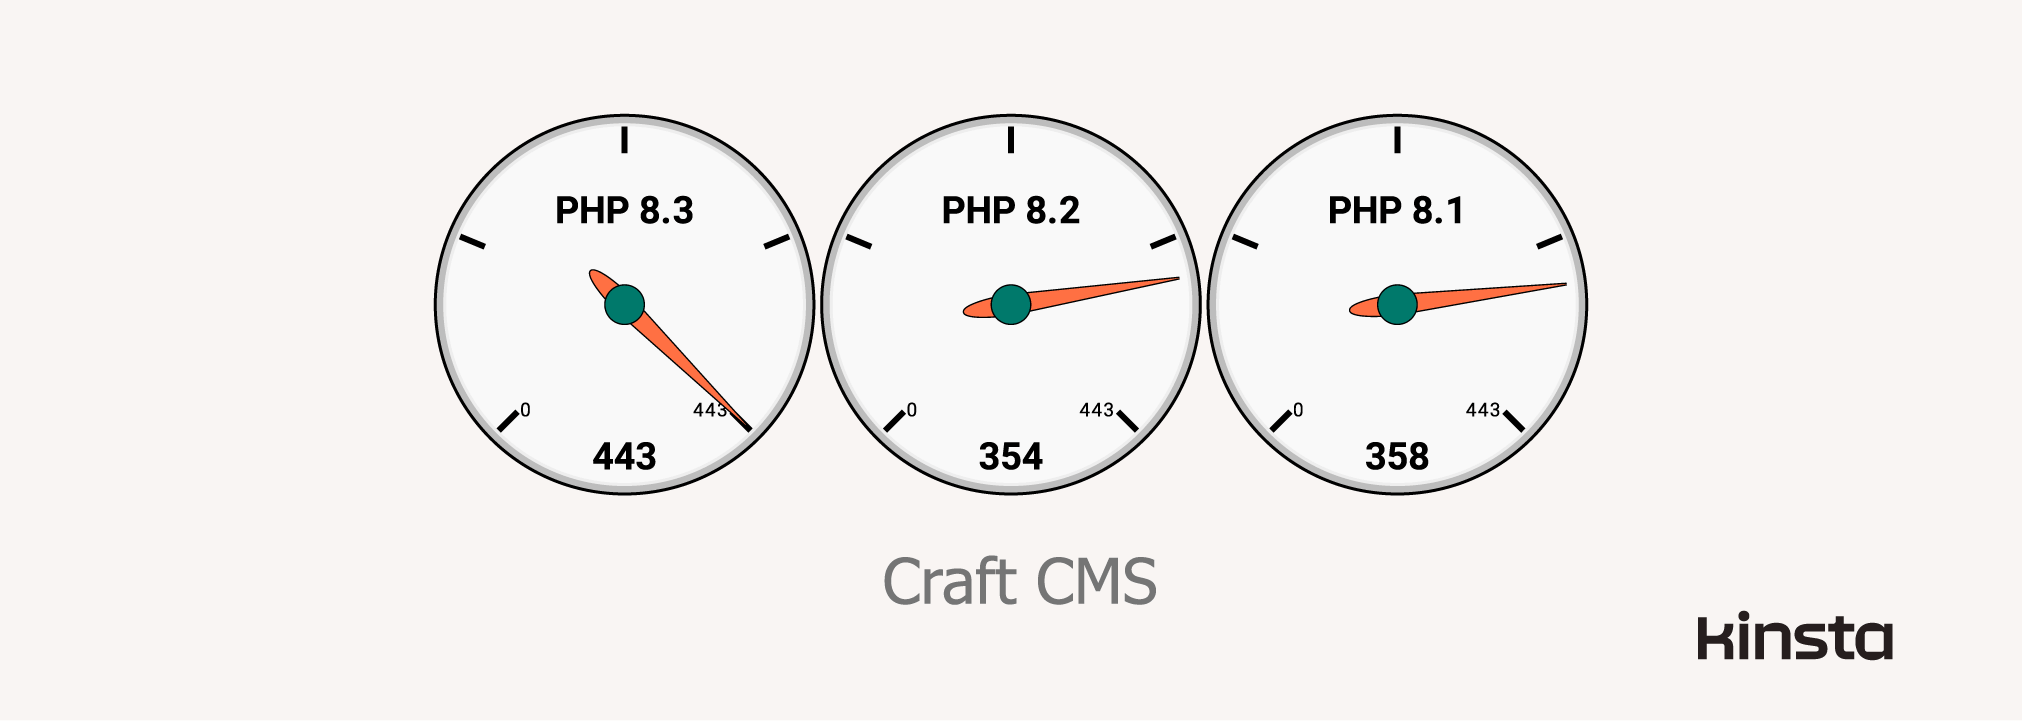 Craft CMS 4.4.16.1 performance on PHP 8.1, 8.2, and 8.3 (in requests/second).